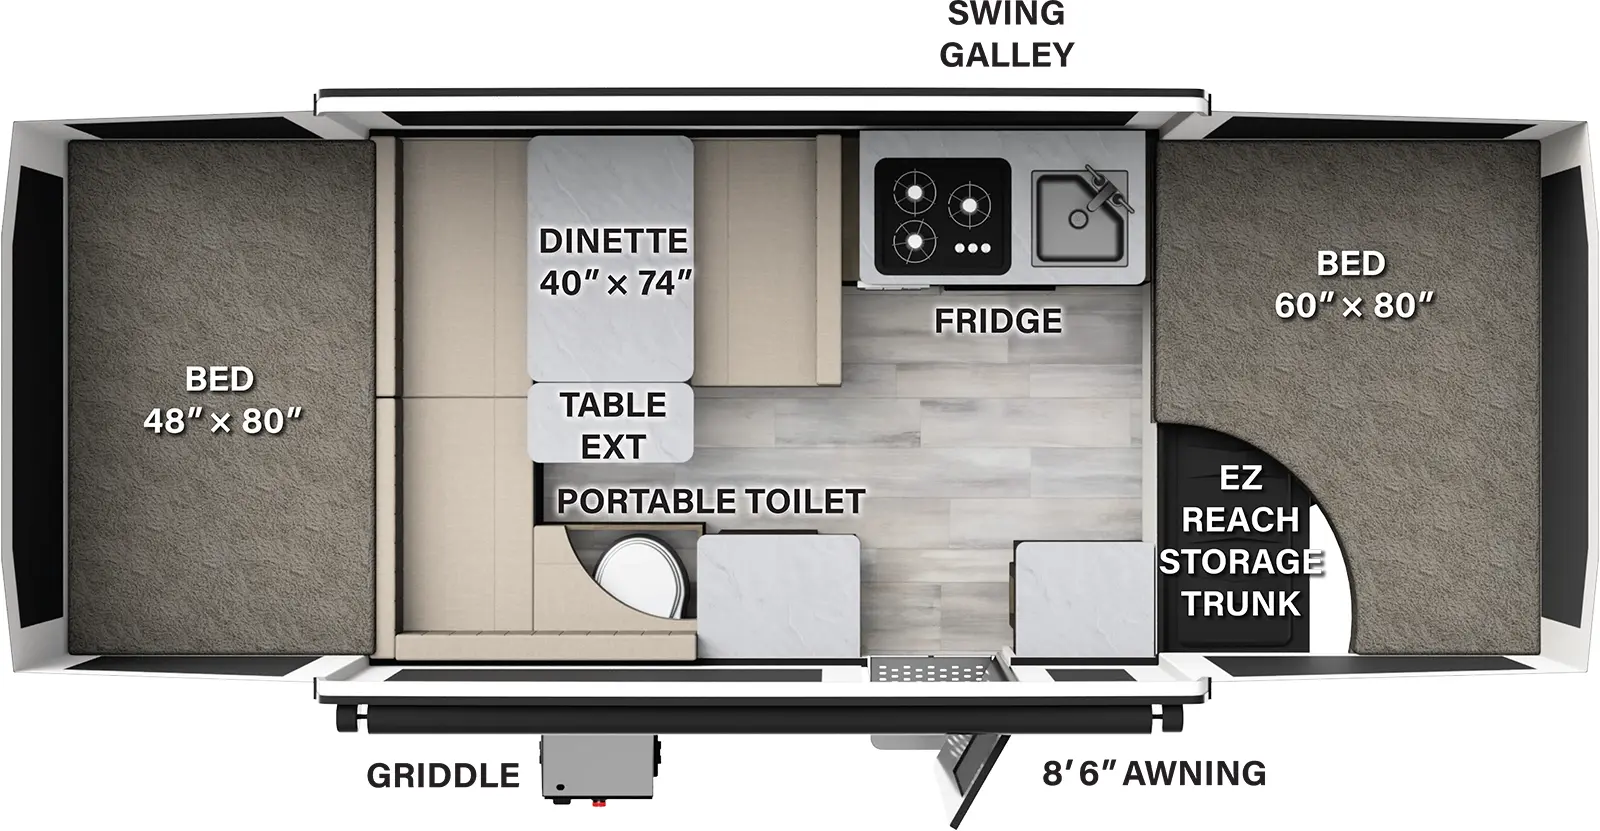 The 206STSE has no slideouts and one entry door. Exterior features an 8 foot 6 inch awning, front EZ reach storage trunk, and griddle. Interior layout front to back: front tent bed; off-door side swing galley with cooktop and sink, and dinette with table extension; door side countertop, entry, portable toilet and more seating; rear tent bed